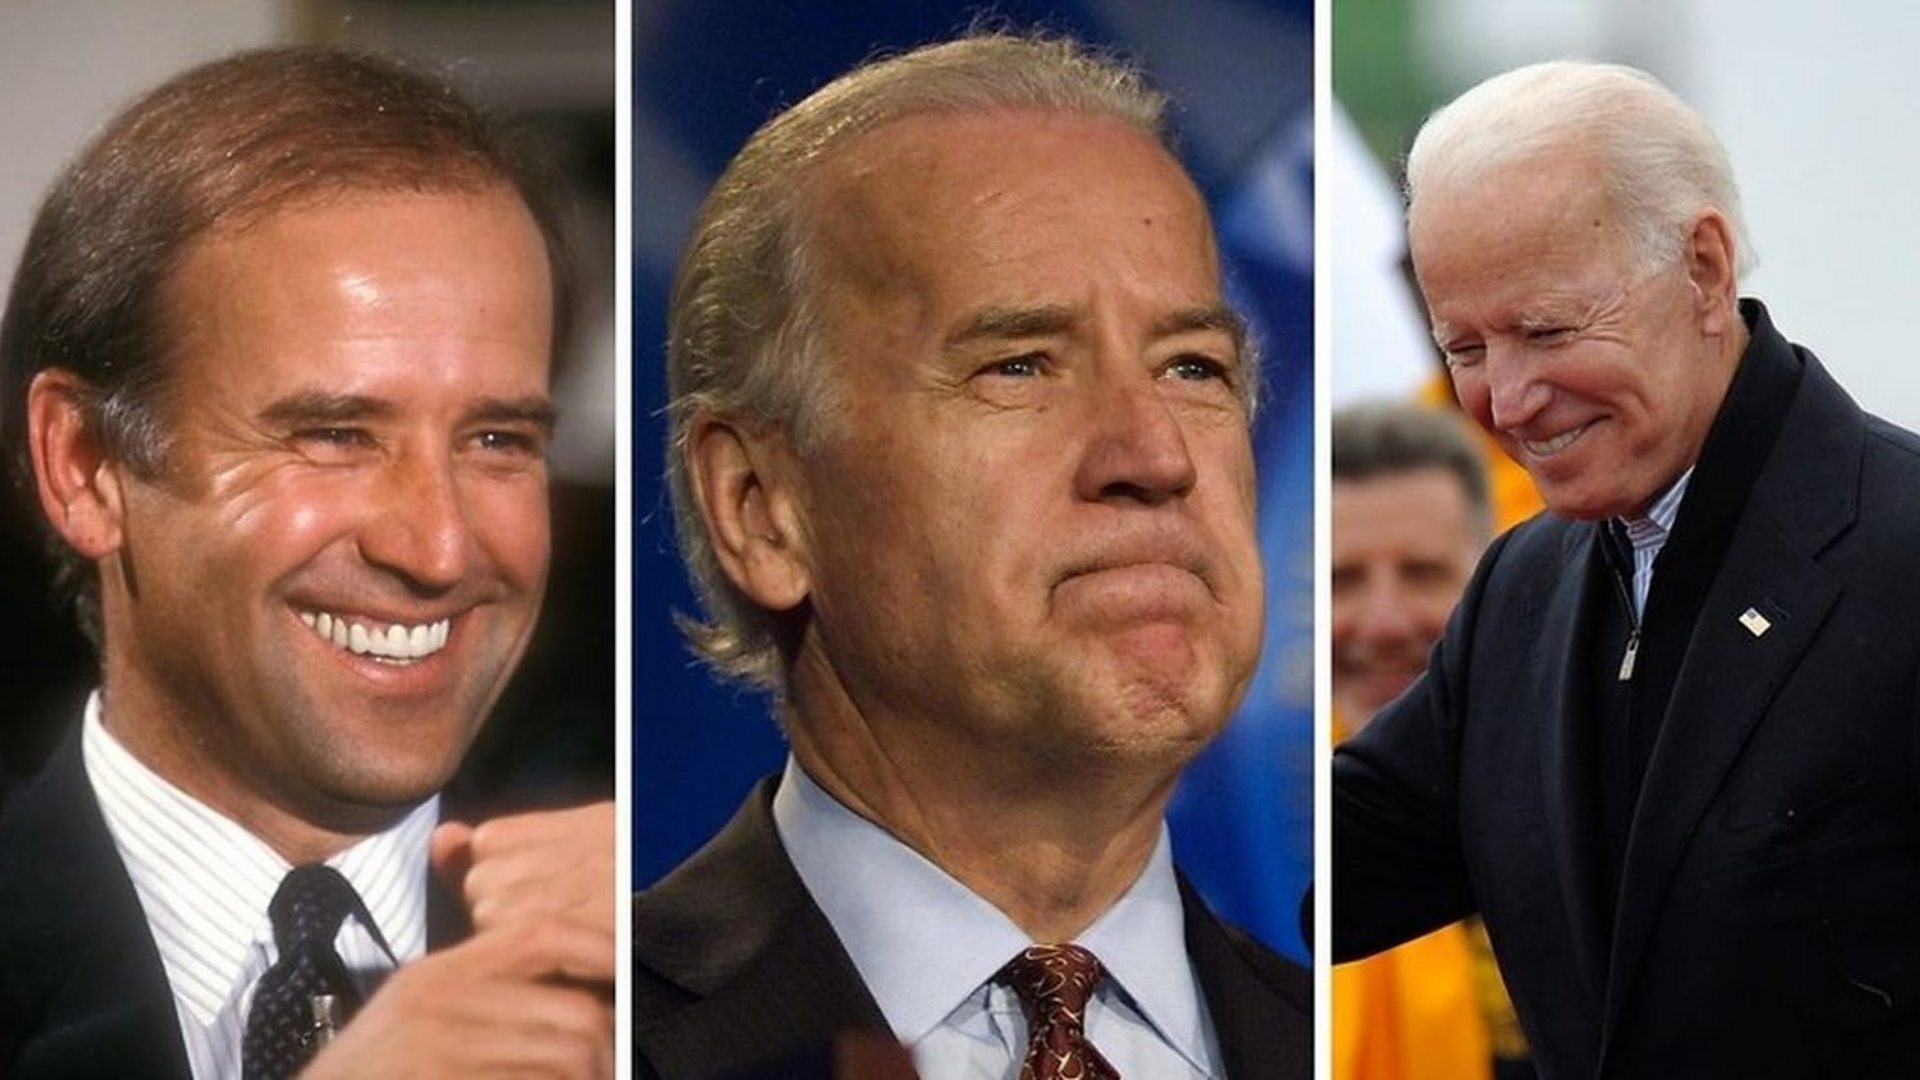 what did joe biden do before he went into politics - Biden|President|Joe|Years|Trump|Delaware|Vice|Time|Obama|Senate|States|Law|Age|Campaign|Election|Administration|Family|House|Senator|Office|School|Wife|People|Hunter|University|Act|State|Year|Life|Party|Committee|Children|Beau|Daughter|War|Jill|Day|Facts|Americans|Presidency|Joe Biden|United States|Vice President|White House|Law School|President Trump|Foreign Relations Committee|Donald Trump|President Biden|Presidential Campaign|Presidential Election|Democratic Party|Syracuse University|United Nations|Net Worth|Barack Obama|Judiciary Committee|Neilia Hunter|U.S. Senate|Hillary Clinton|New York Times|Obama Administration|Empty Store Shelves|Systemic Racism|Castle County Council|Archmere Academy|U.S. Senator|Vice Presidency|Second Term|Biden Administration